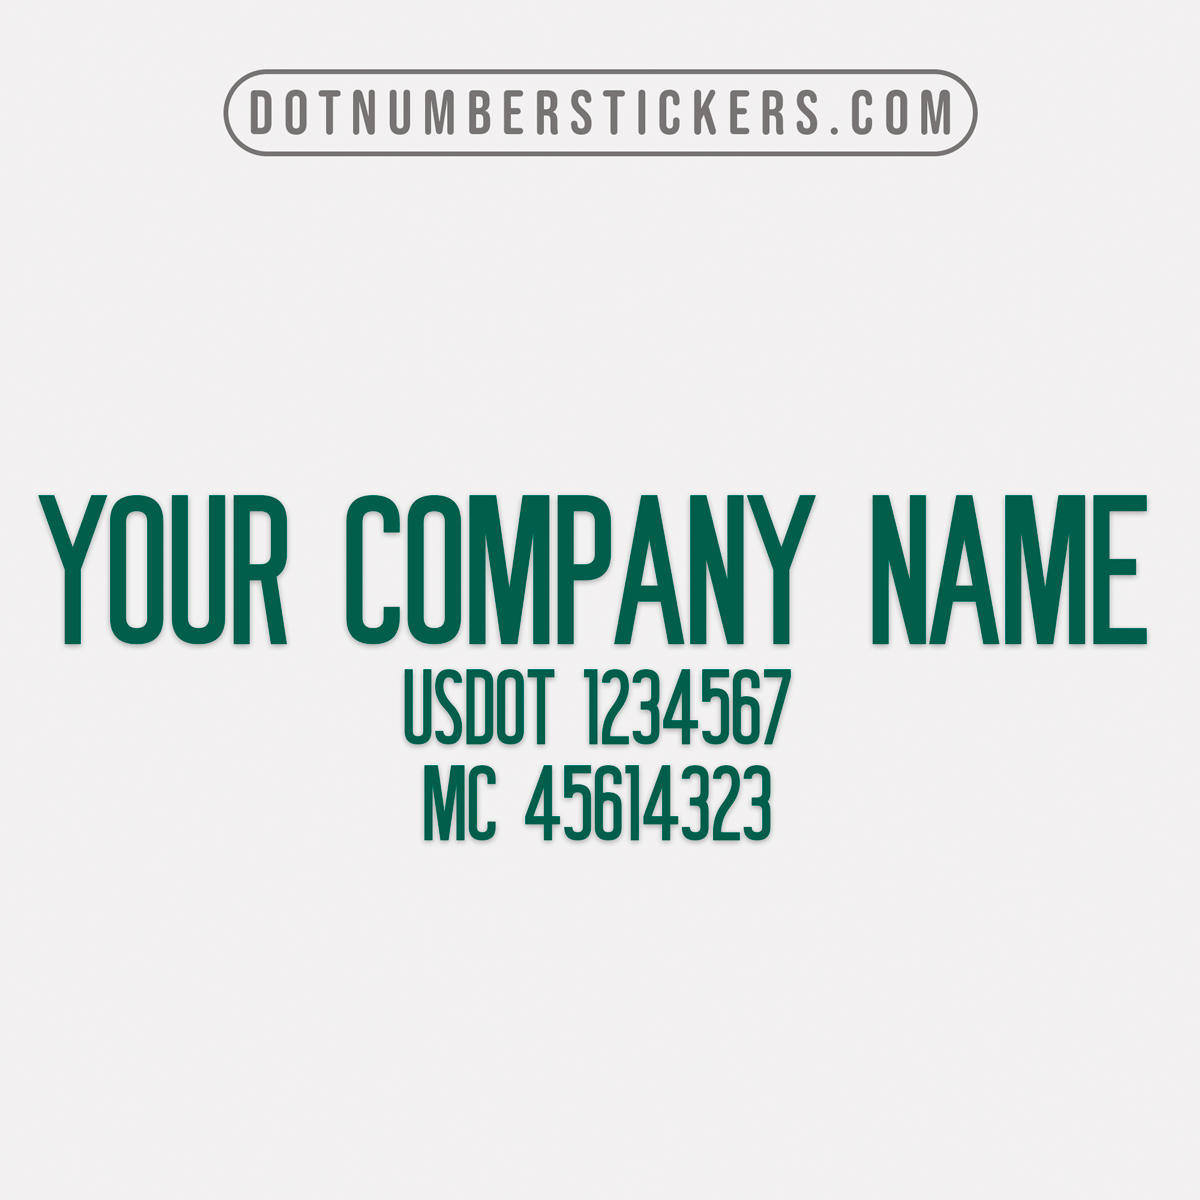 Trucking business company name decal with usdot, mc